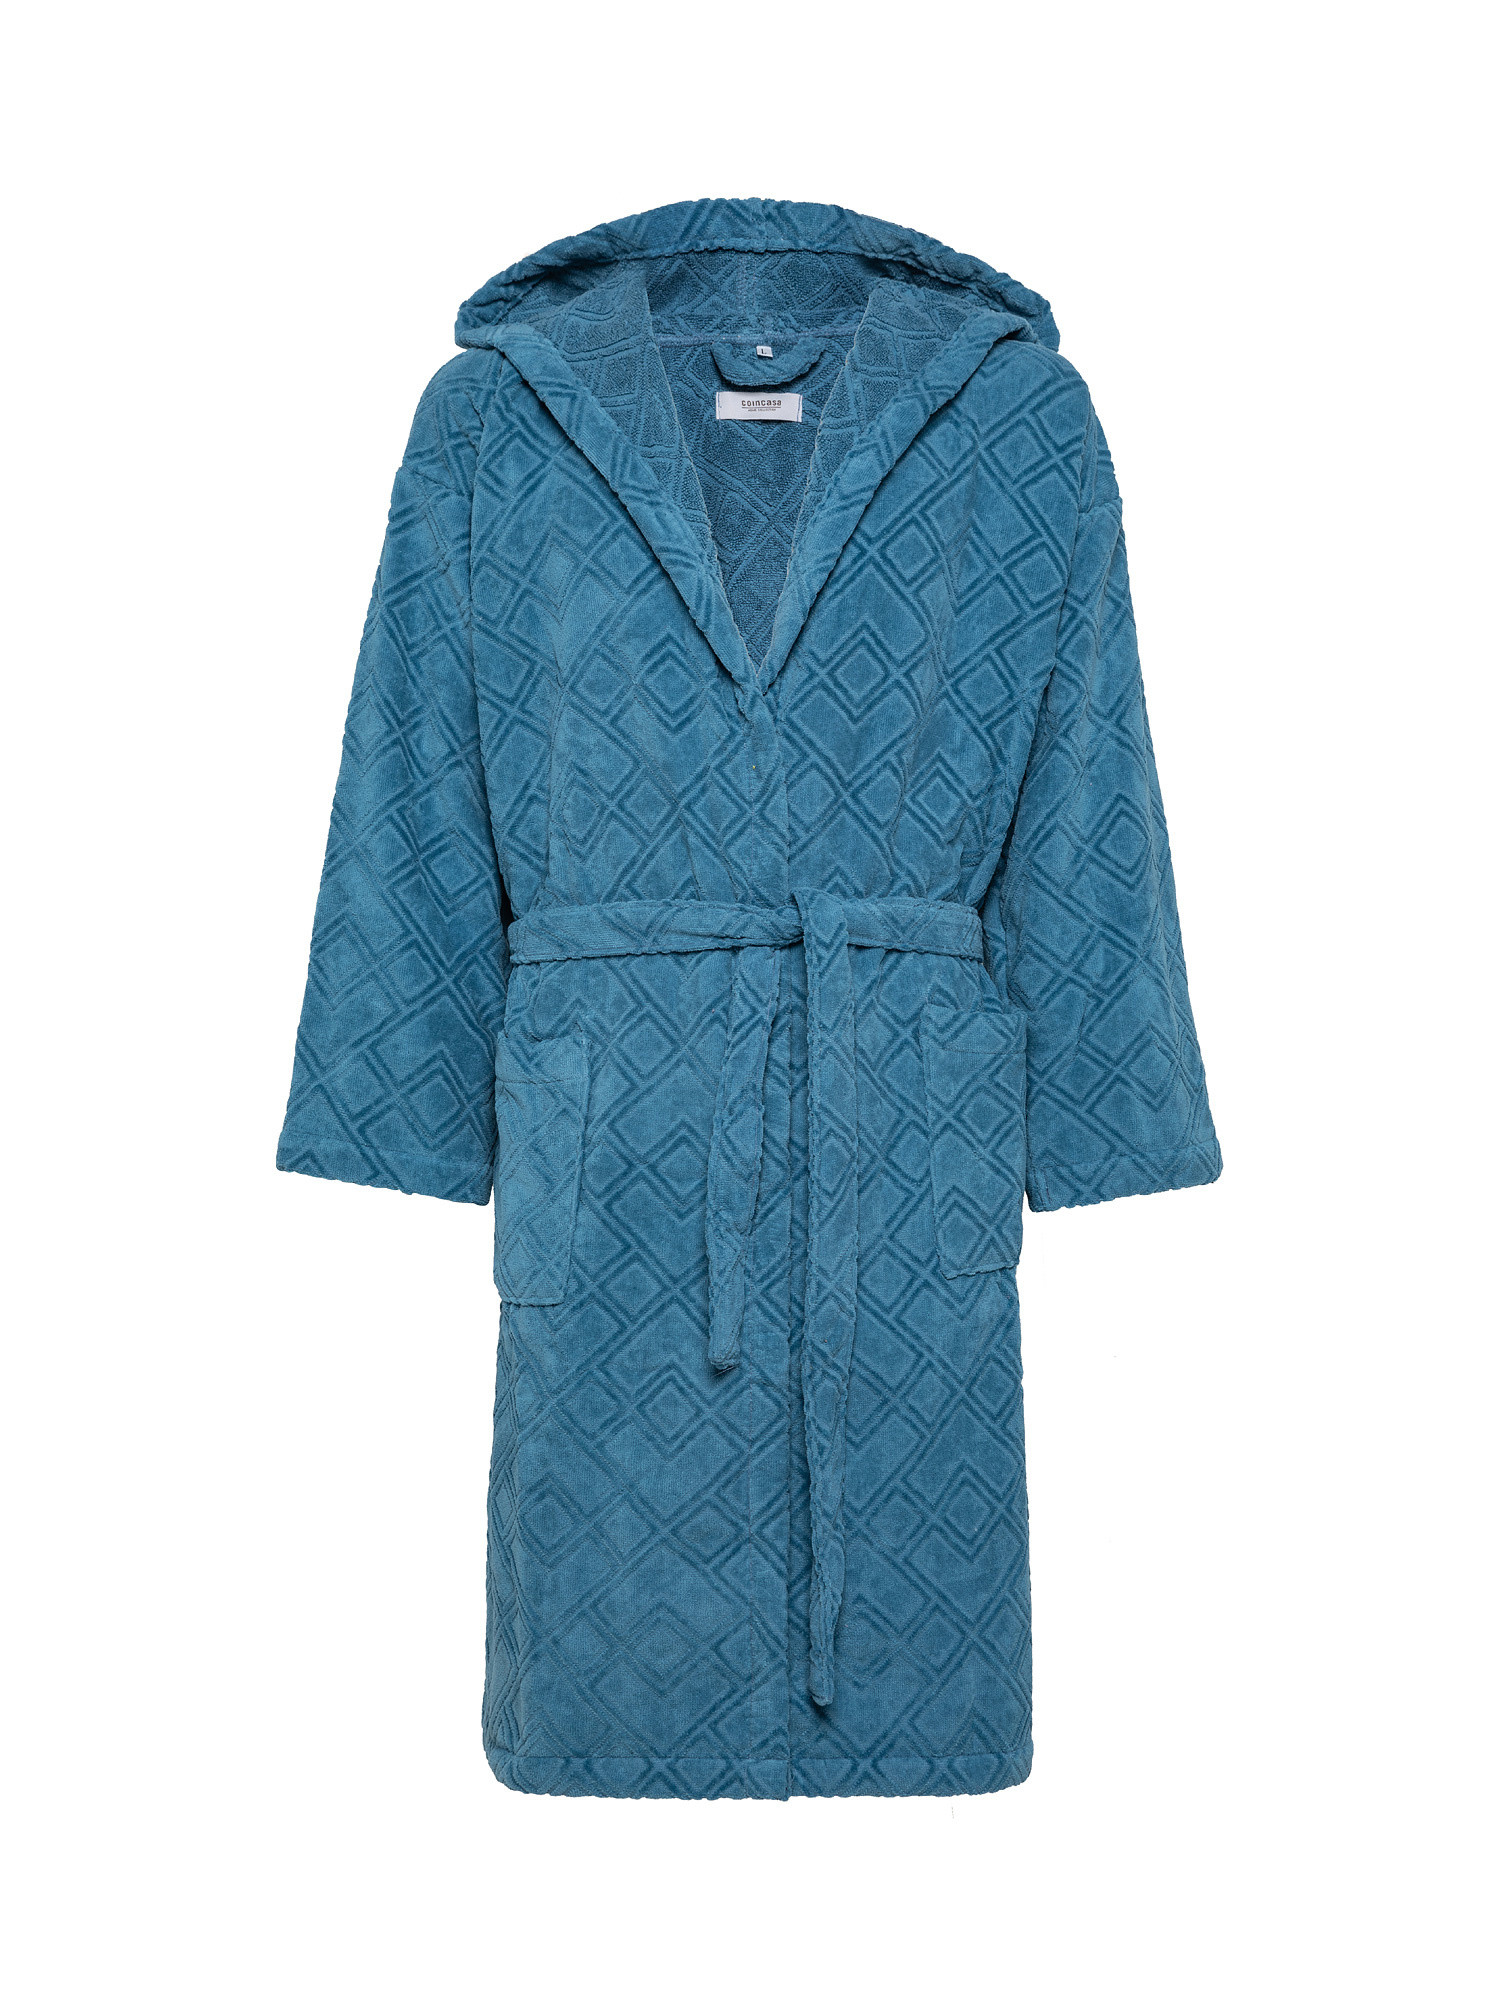 Cotton velor bathrobe with check pattern, Blue, large image number 0